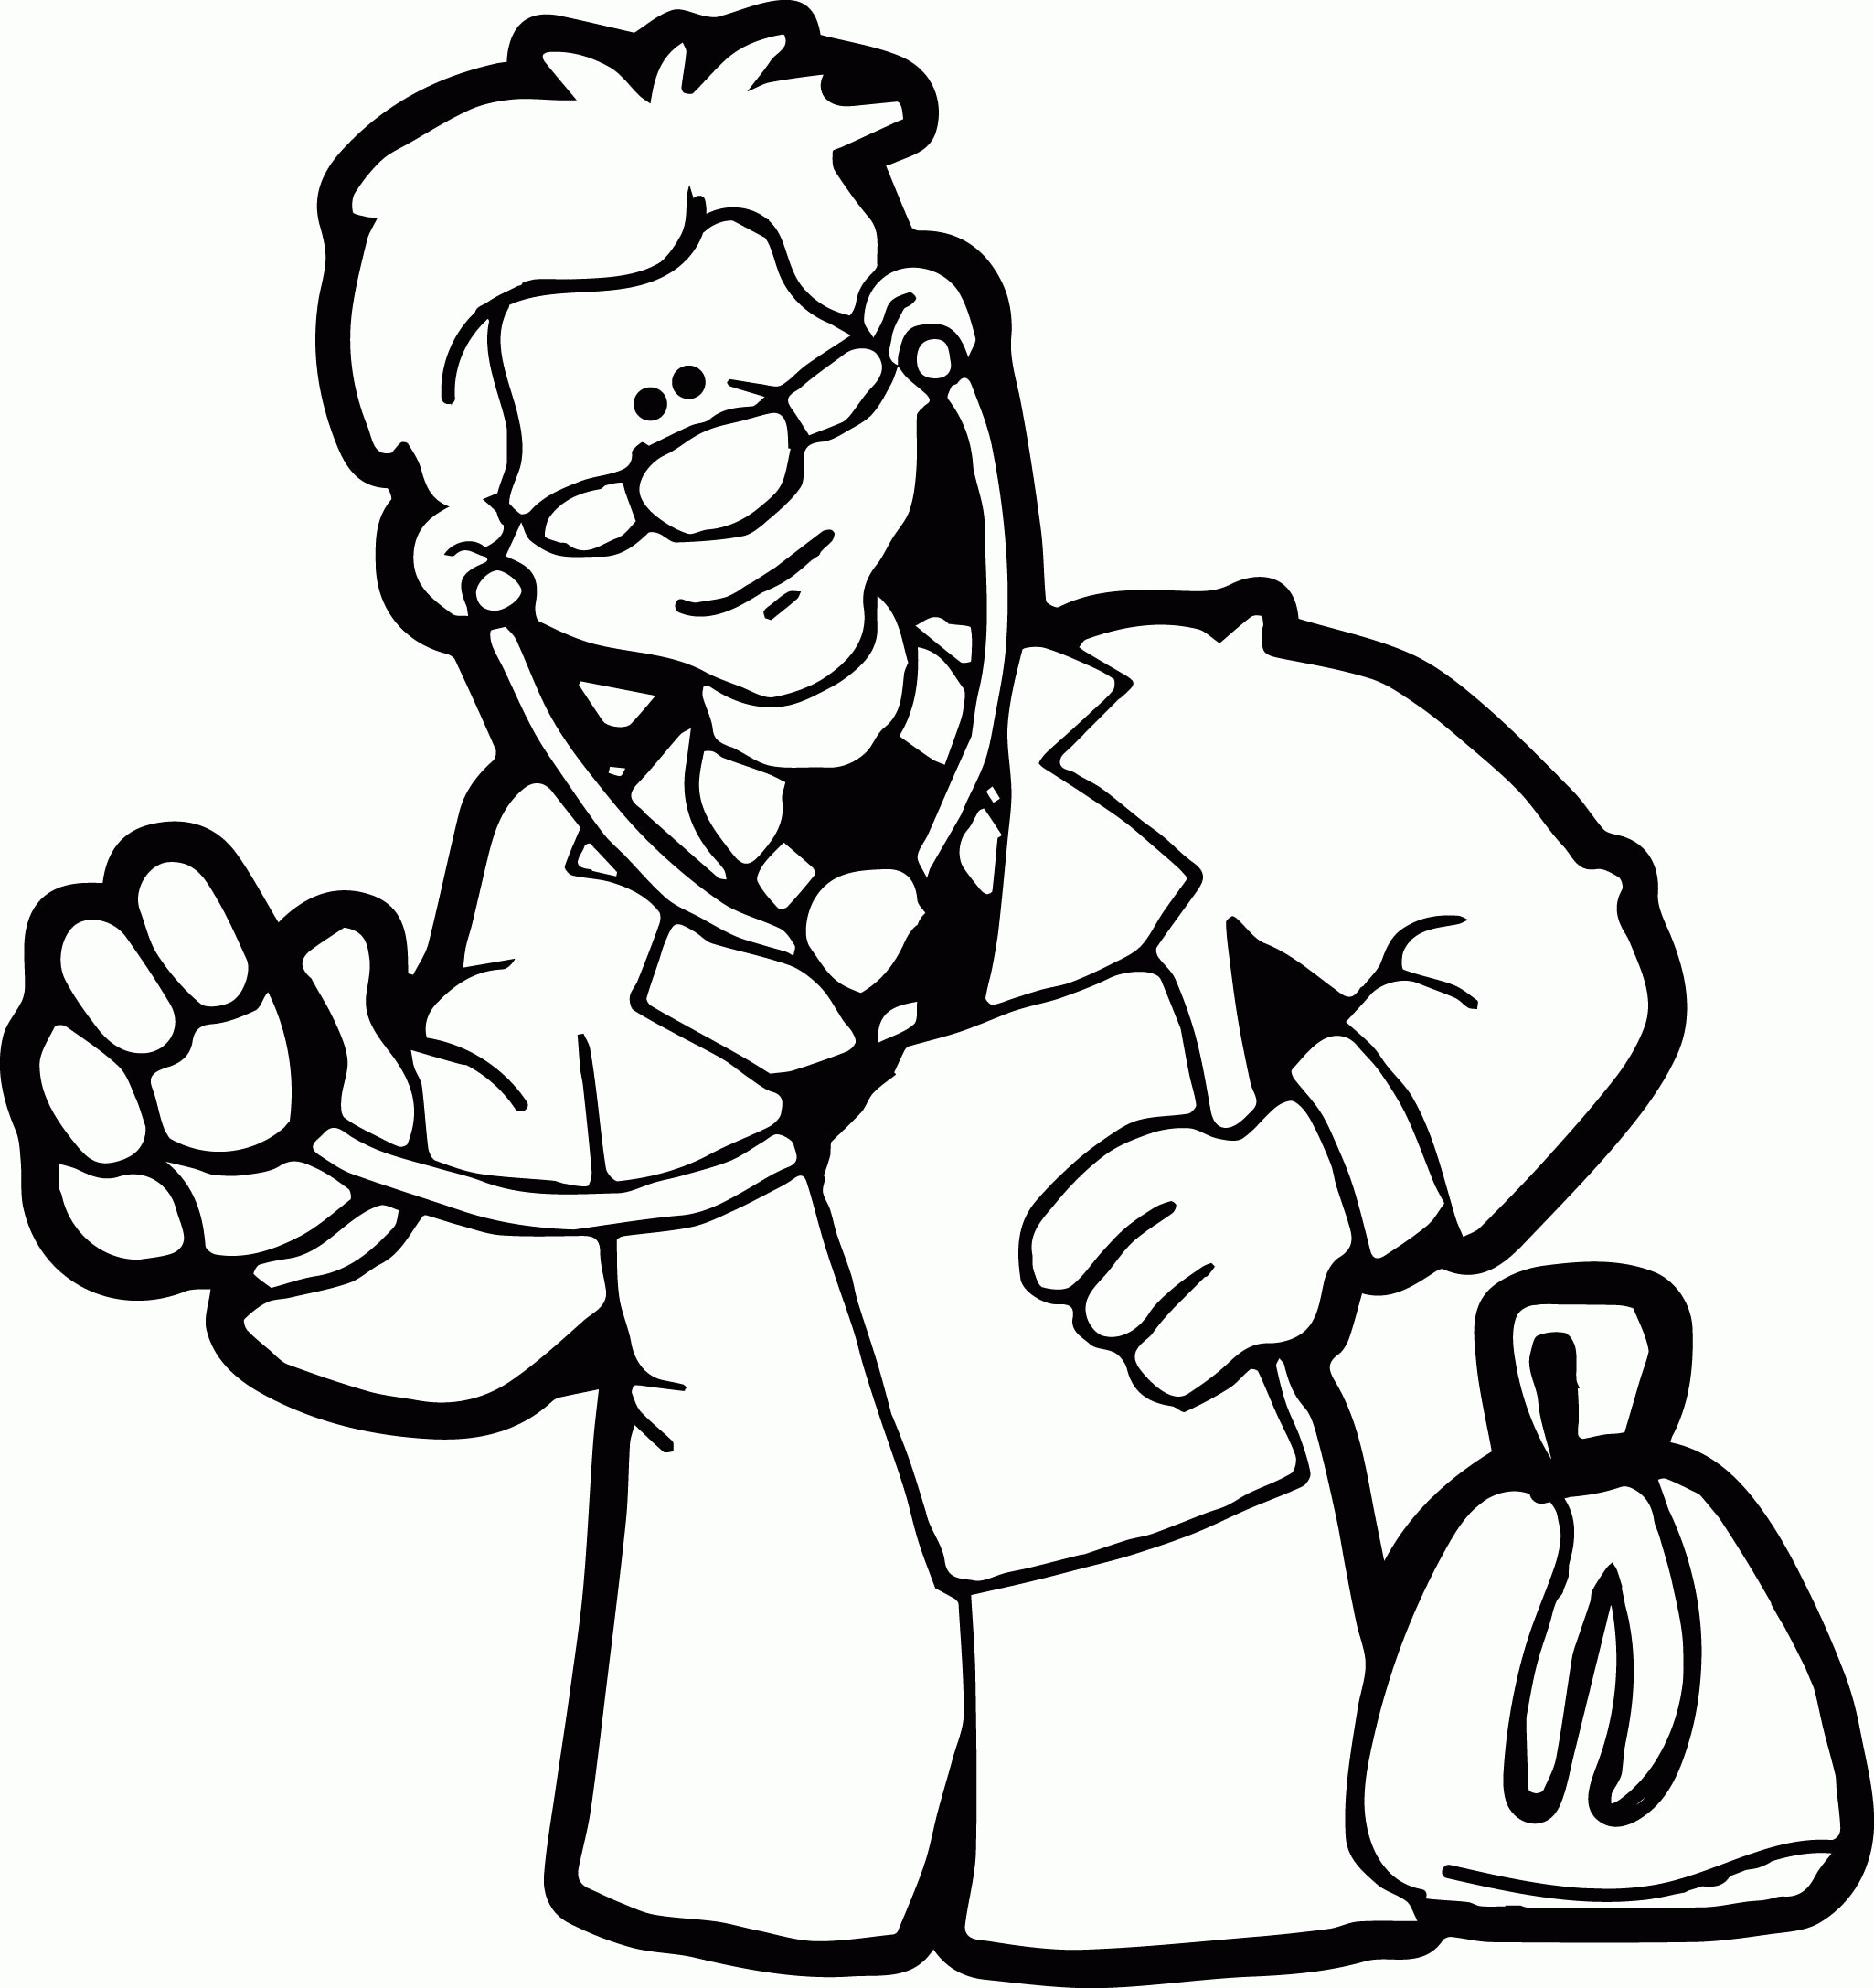 Doctors Coloring Page : Doctor's Tools | Worksheet | Education.com